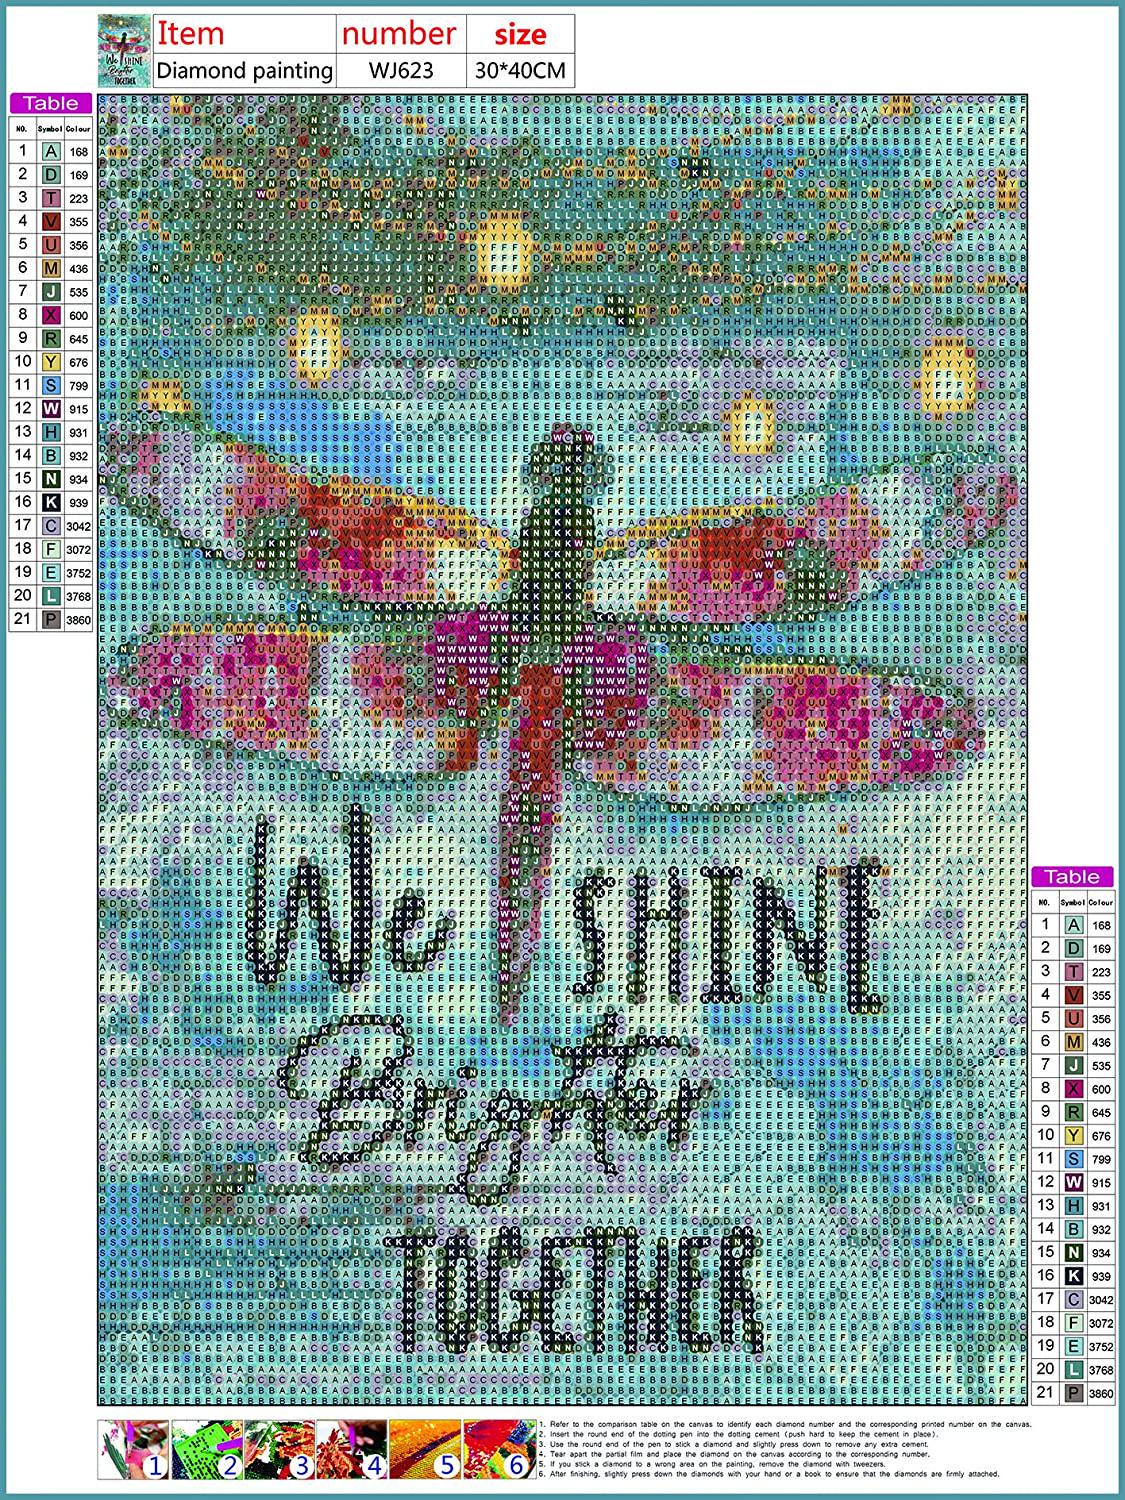 Eiflow, Eiflow Diamond Painting Art Kits for Adults Dragonfly,12X16in Full Round Drill Embroidery Kits Paint by Diamonds DIY Art Craft for Wall Decor - We Shine Brighter Together